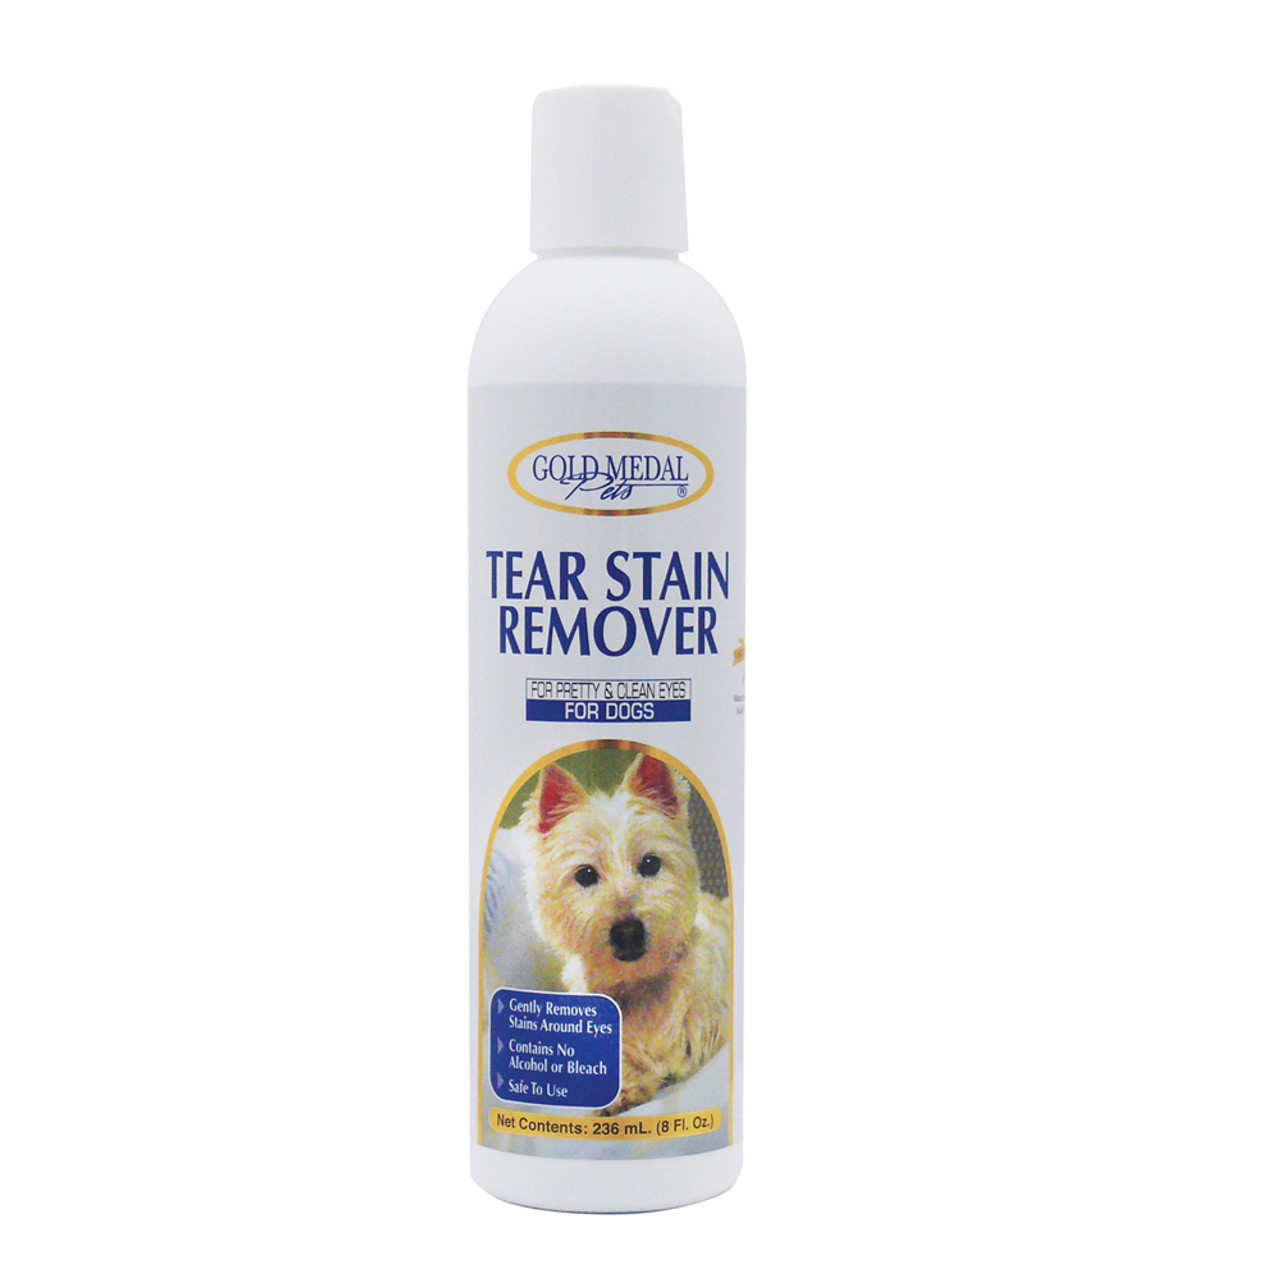 tear stain remover for dogs